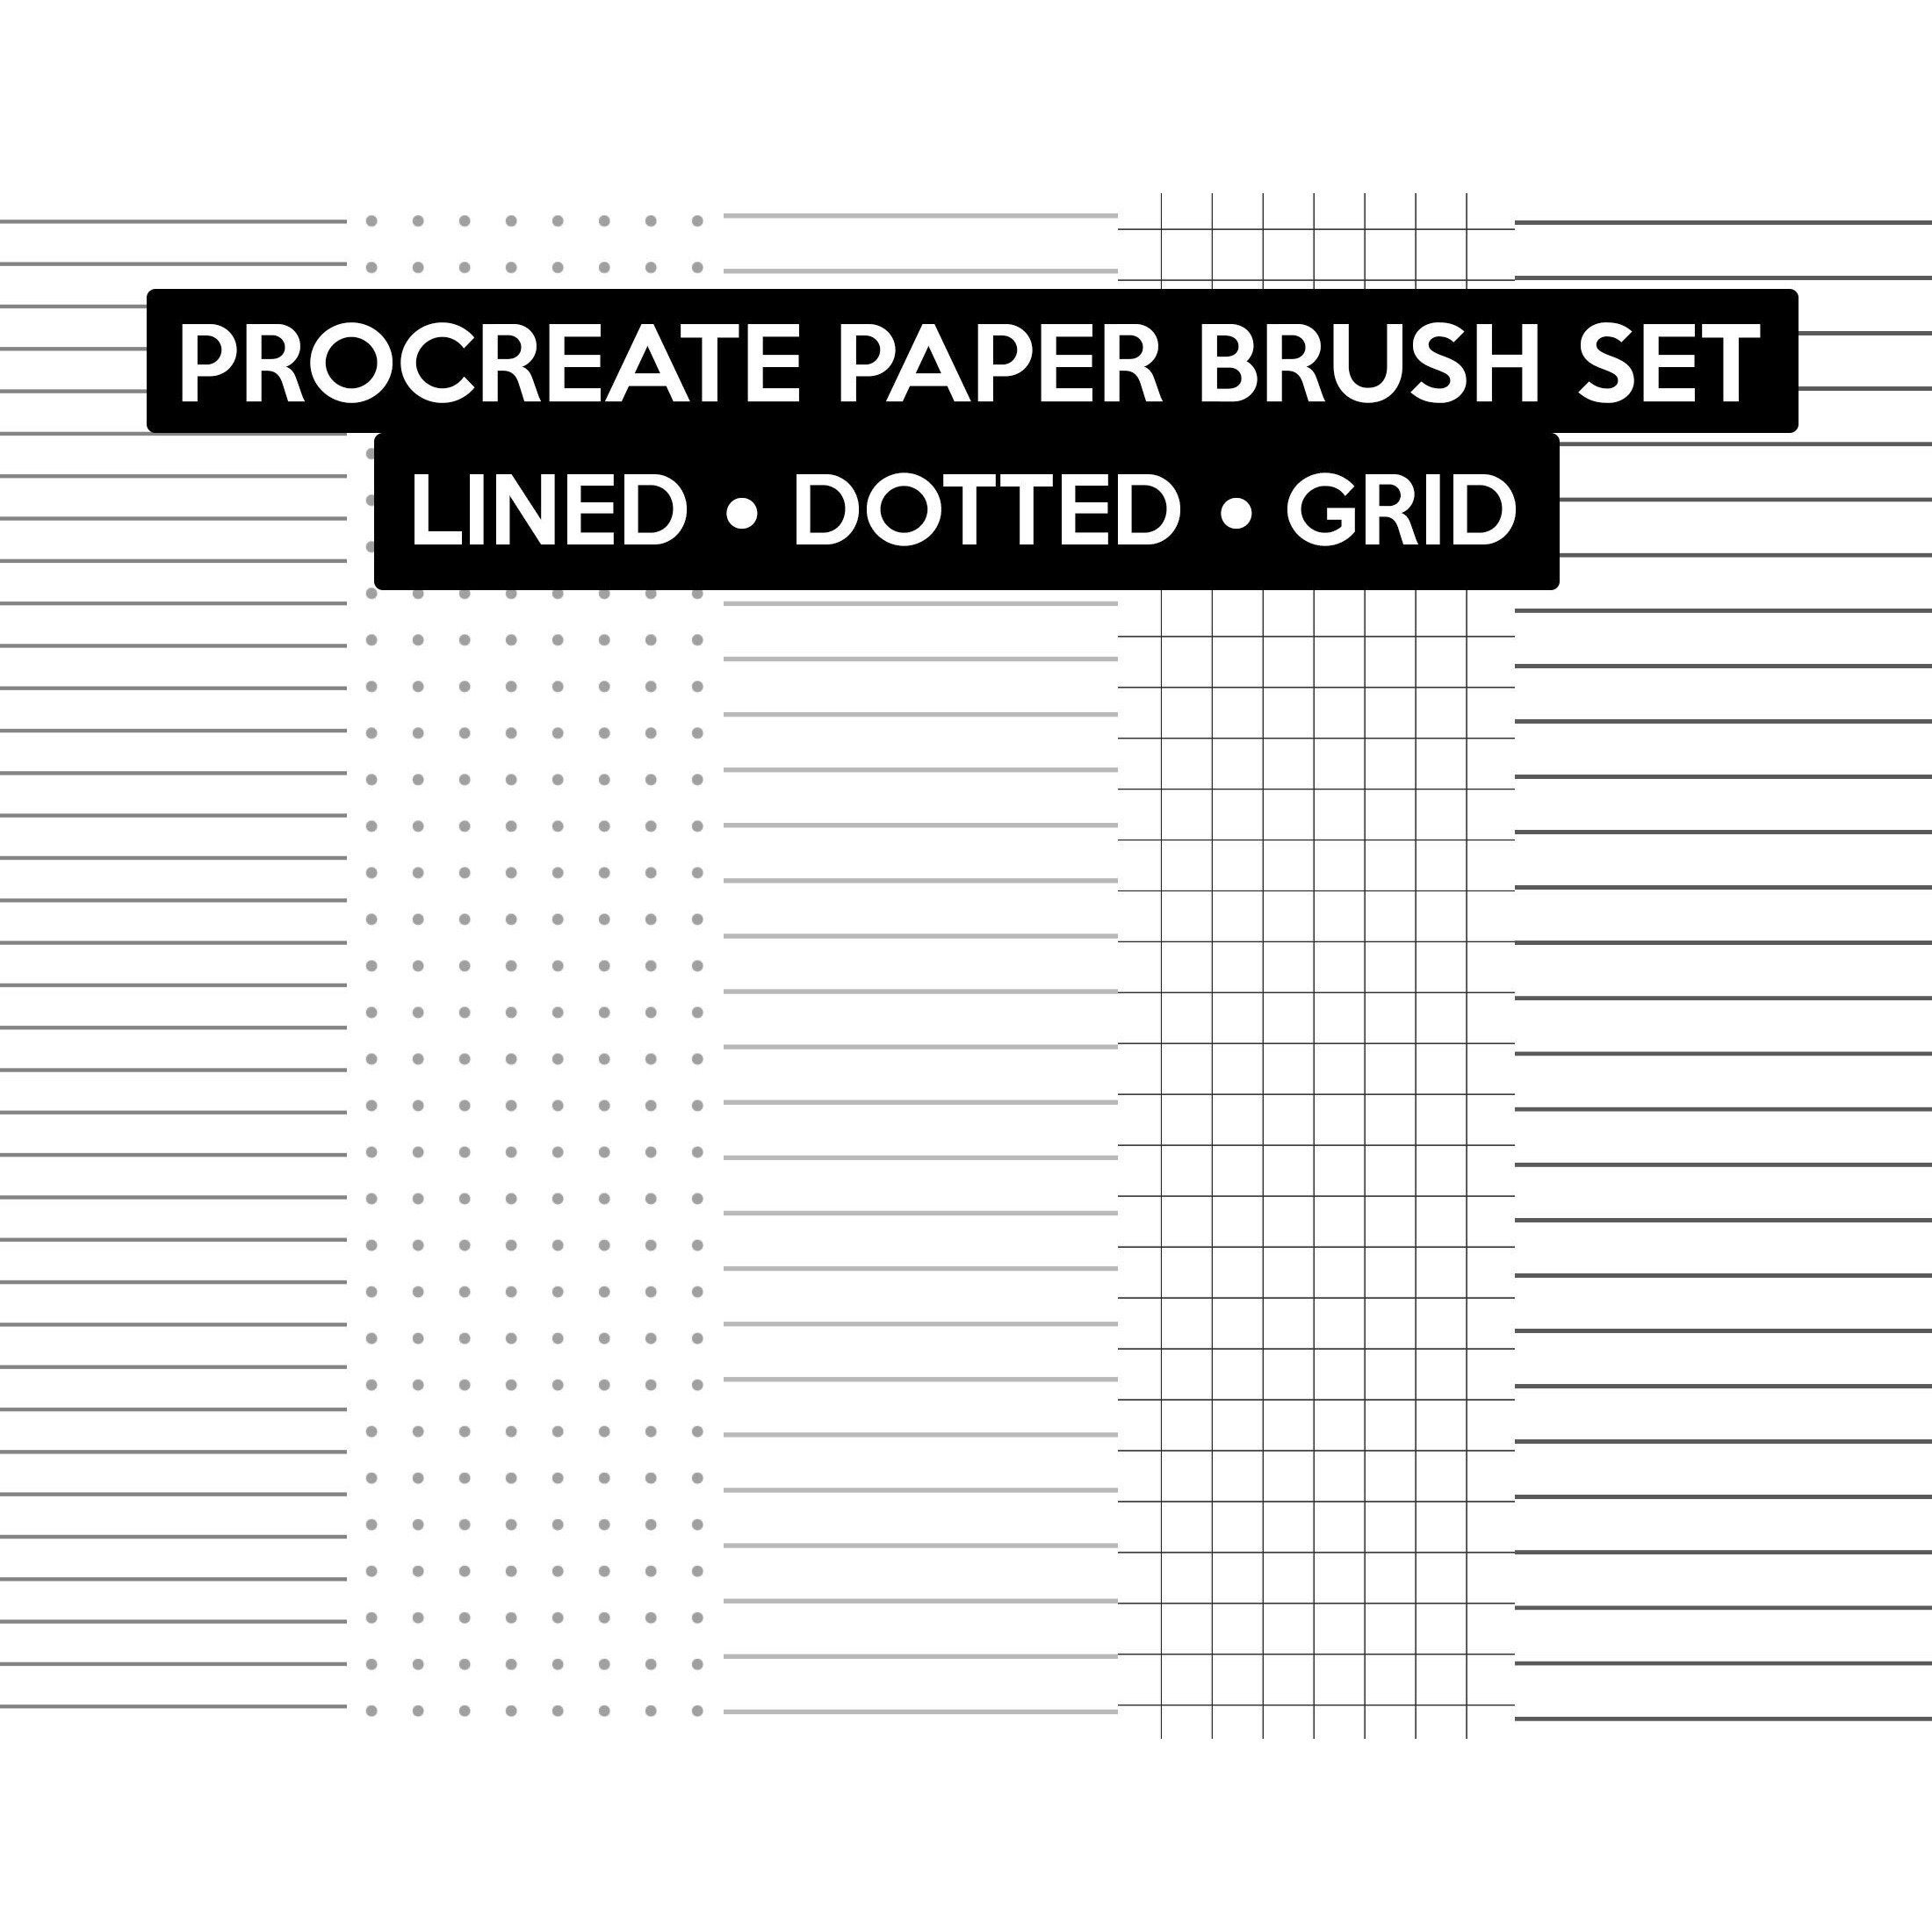 Kids Practice Writing Paper: Blank Handwriting Sheets With Dash Center Line  For Kids Learning Penmanship - Large 8.5x11 - 100 Pages